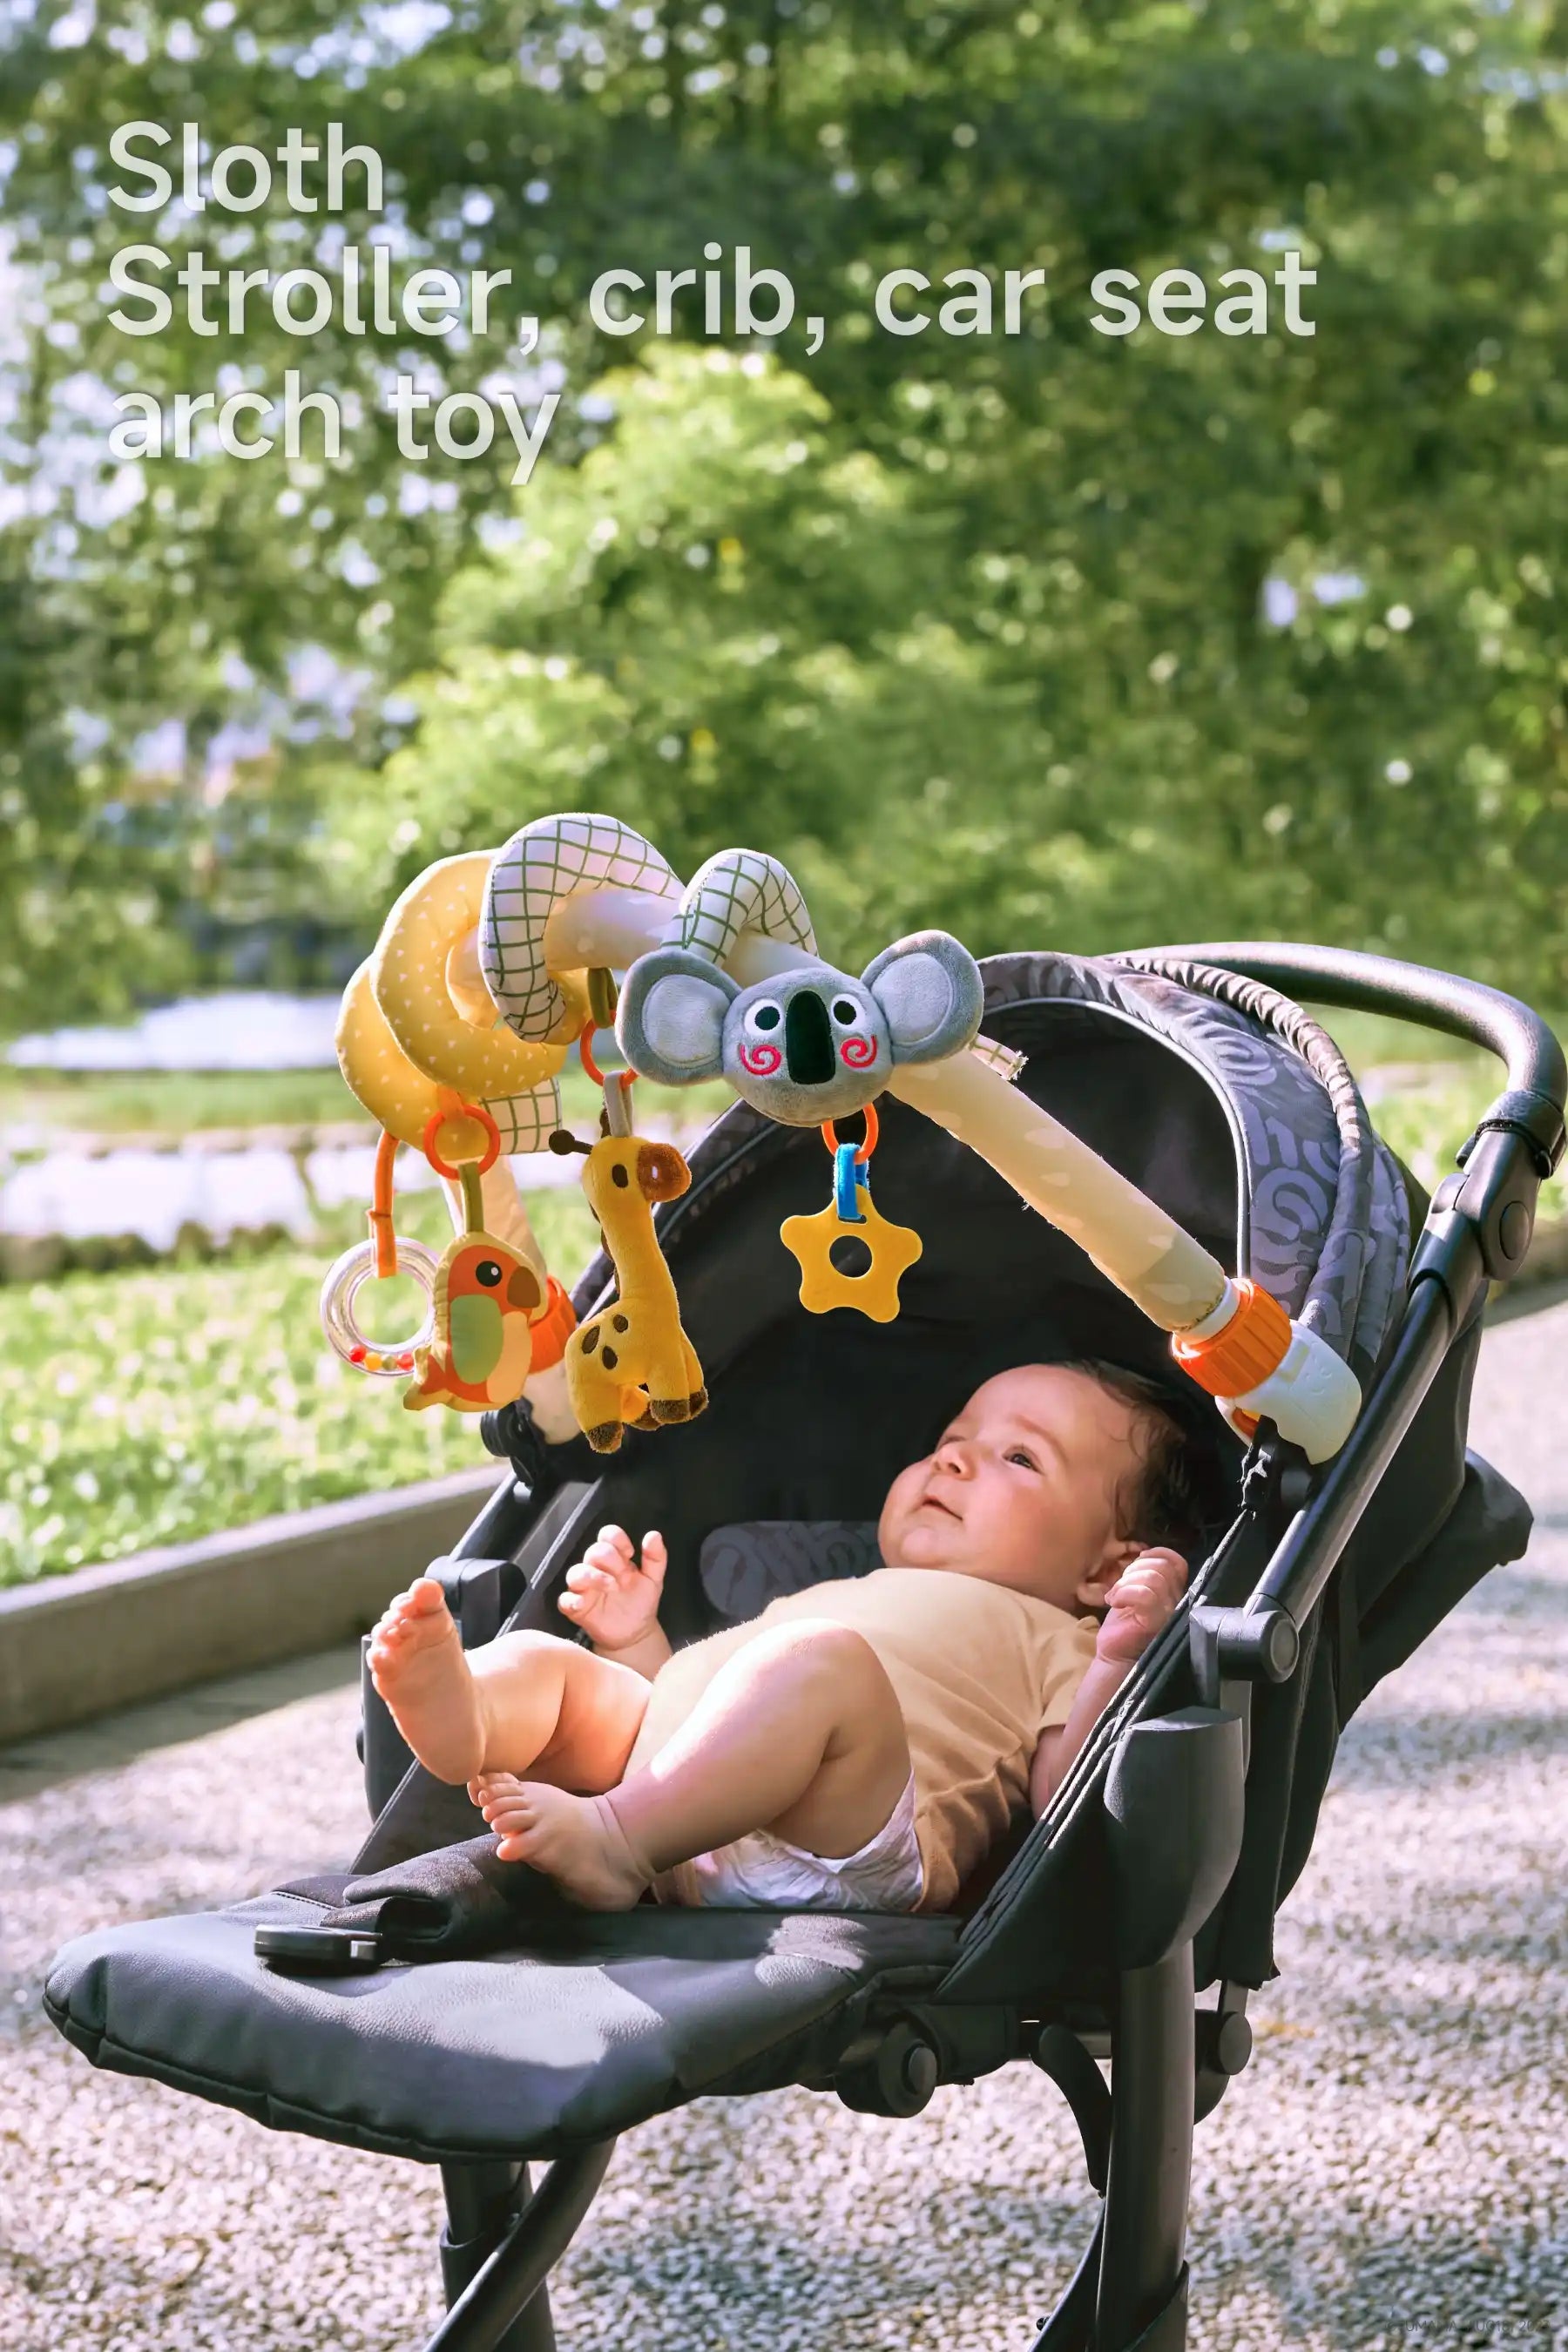 Outdoor baby playing with an arch toy in a stroller